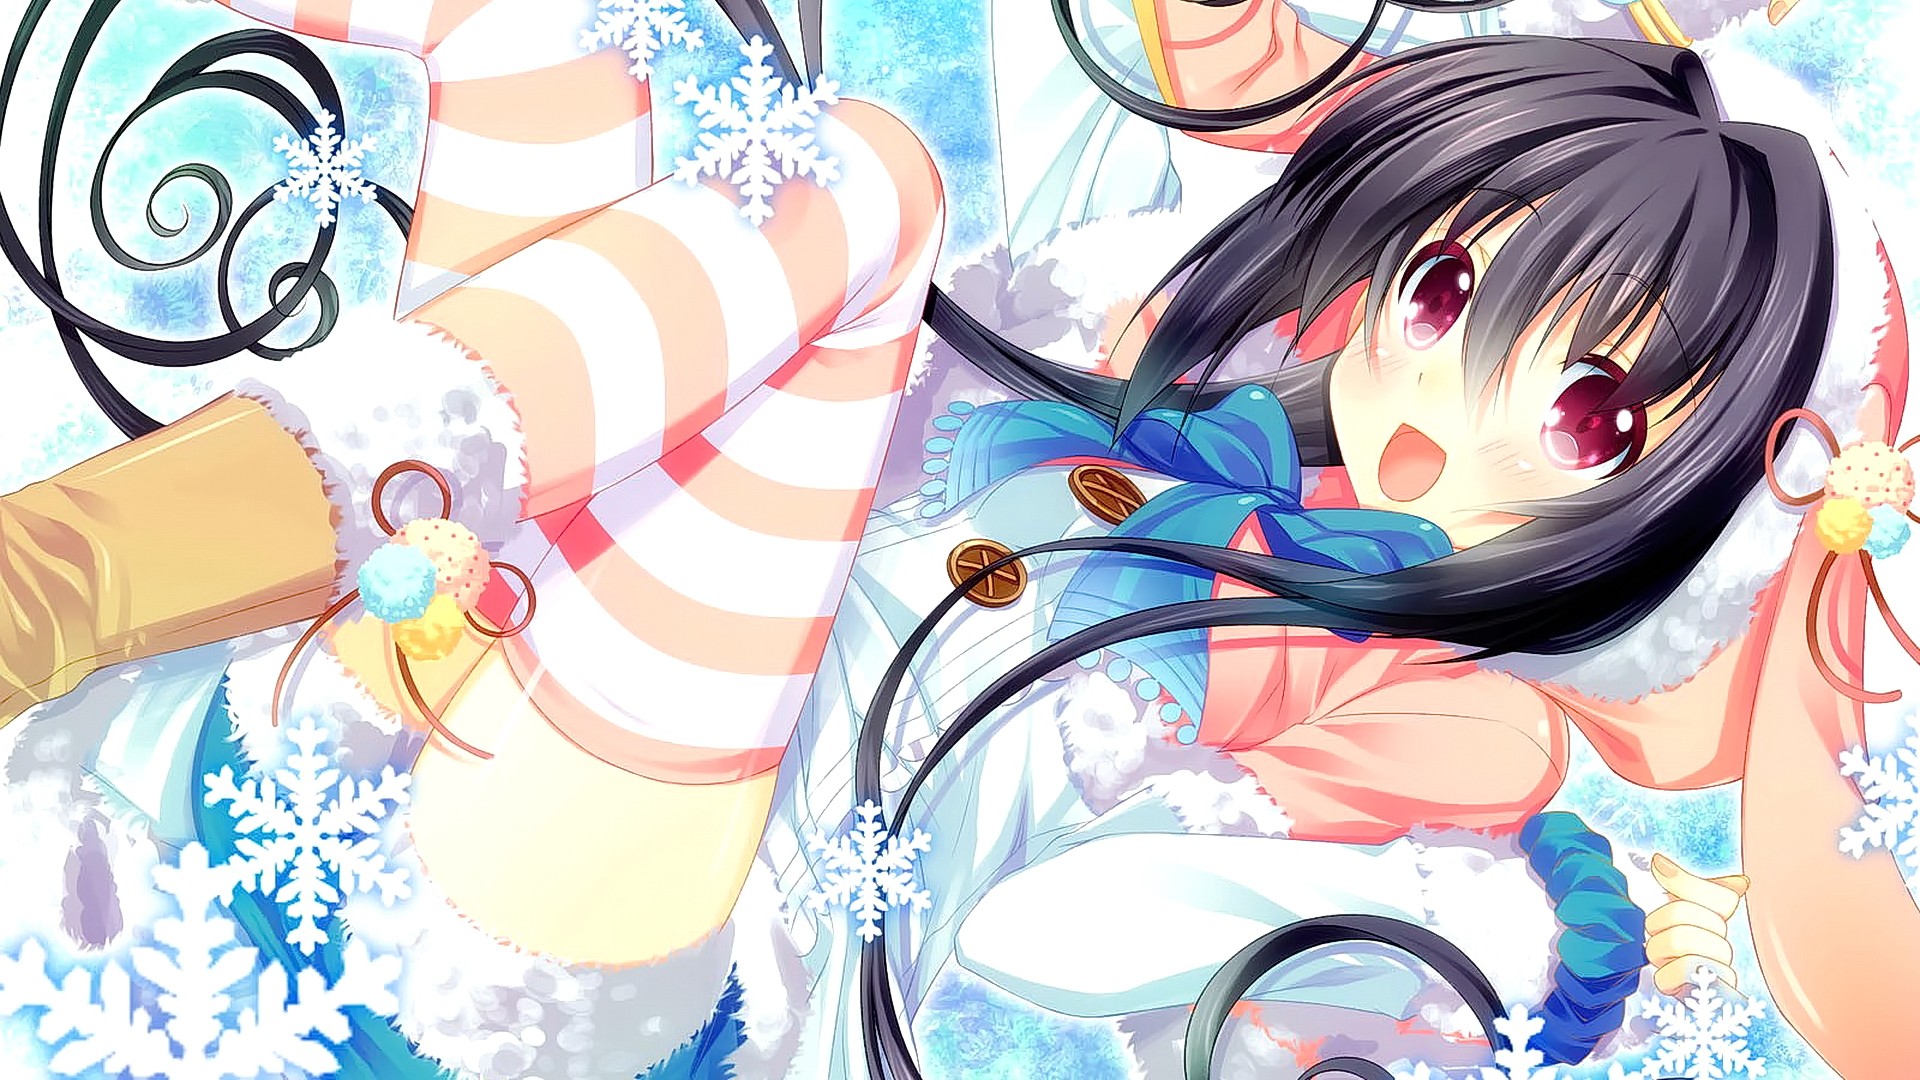 Anime 1920x1080 anime anime girls brunette long hair red eyes open mouth smiling looking at viewer thighs legs stockings striped stockings dark hair